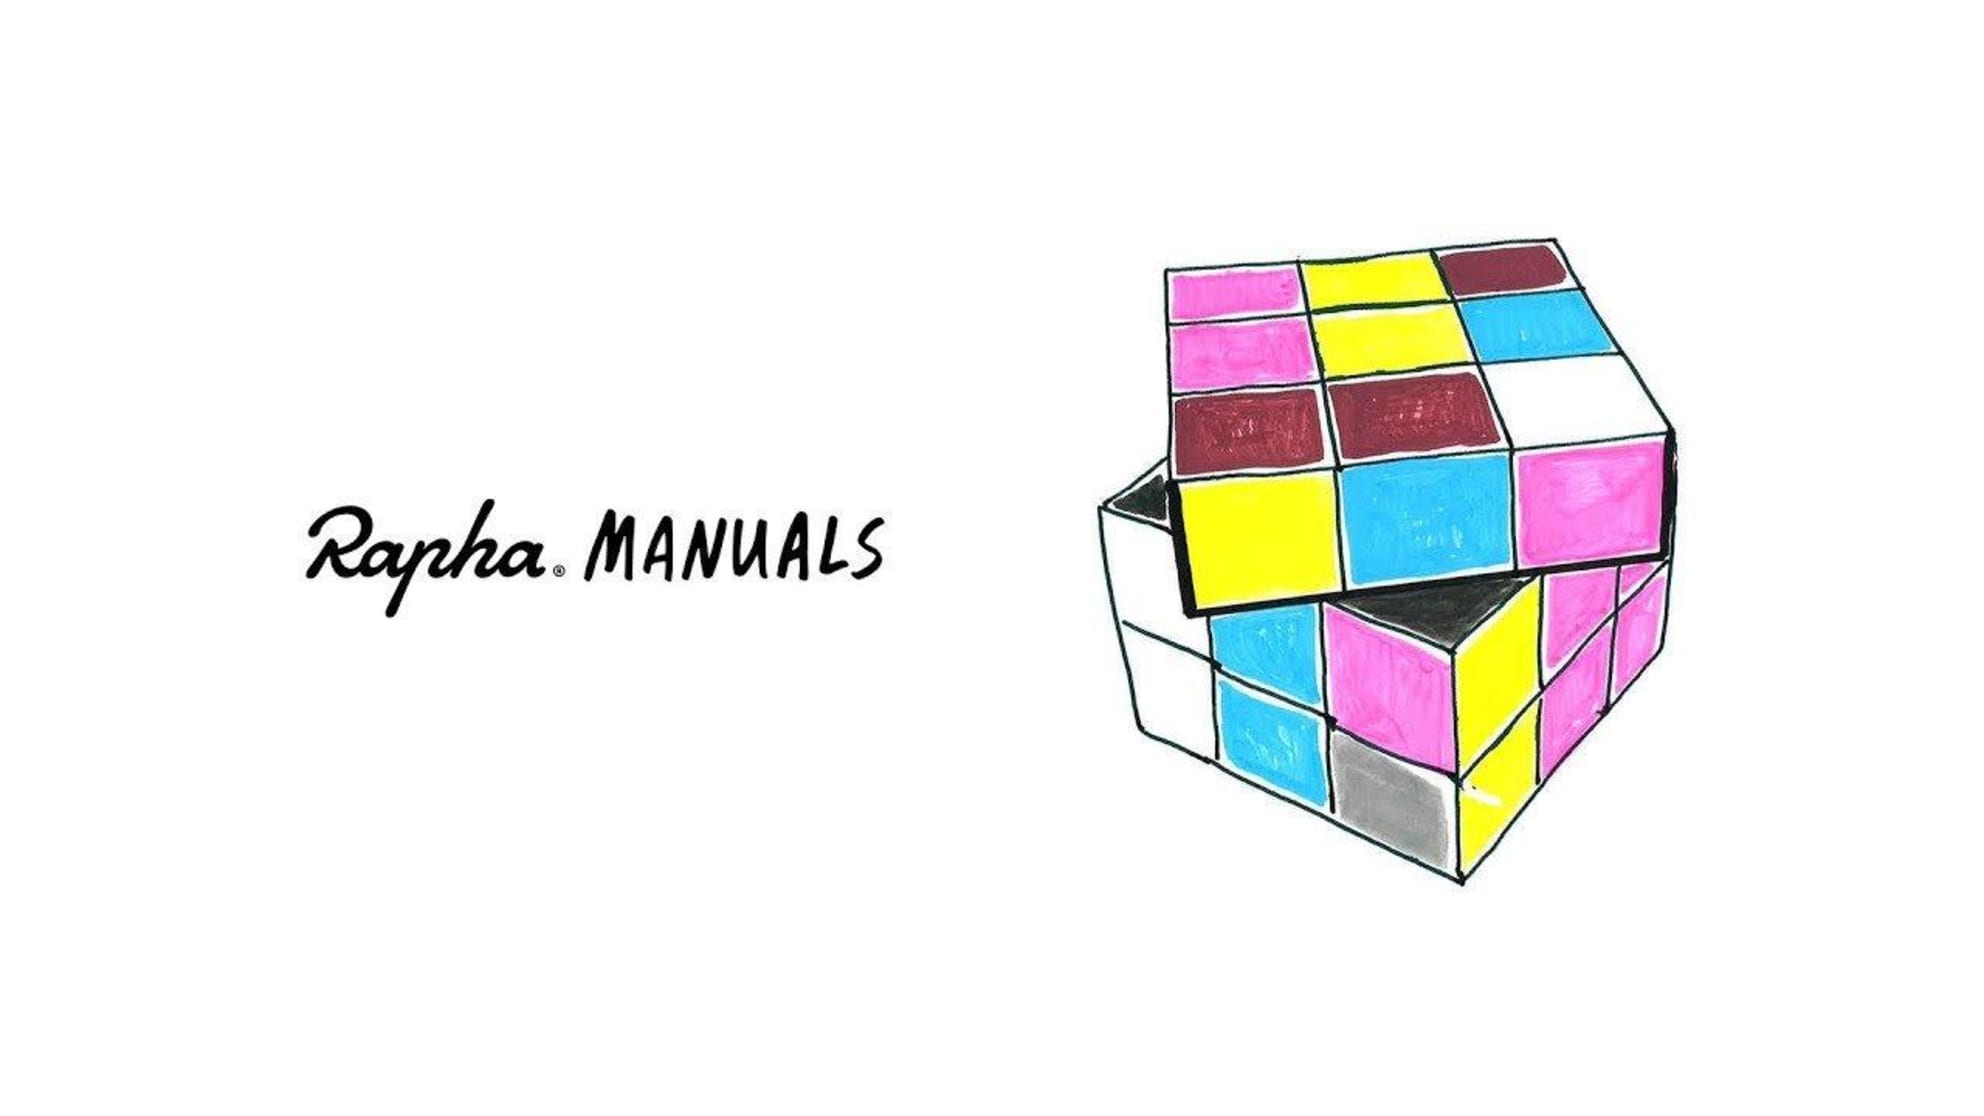 Rapha Manuals: Finding The Answers